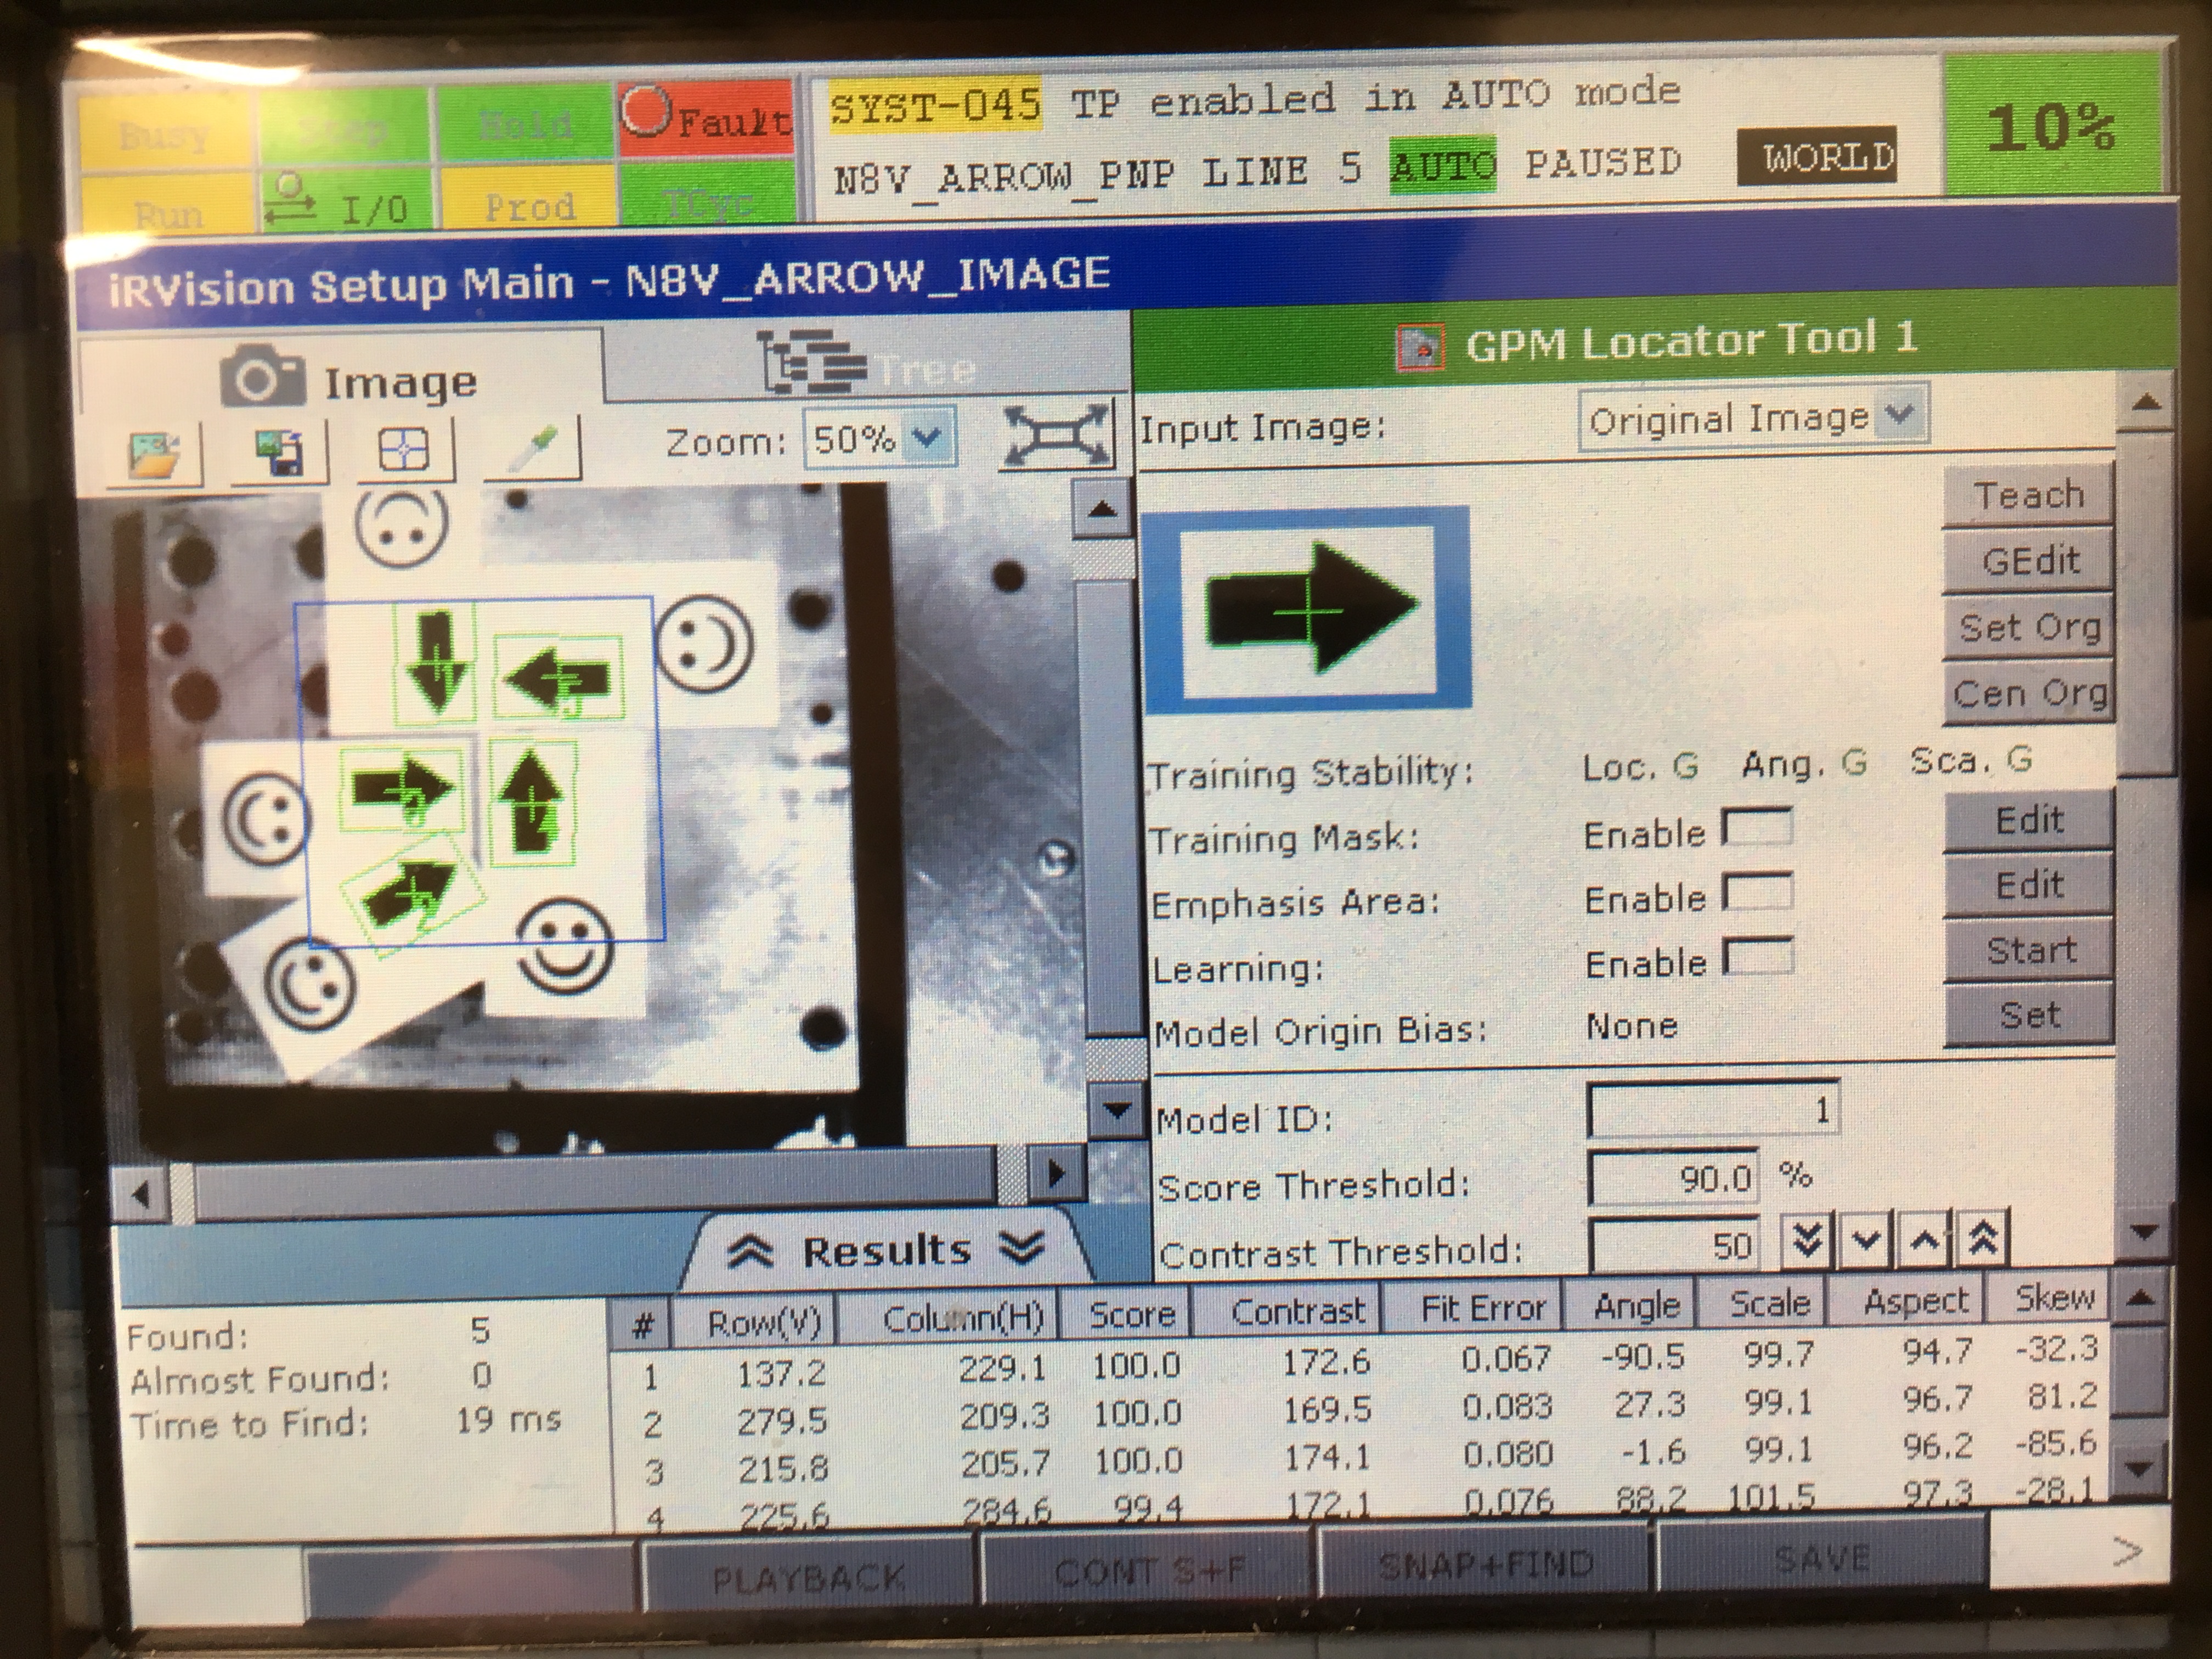 This is a picture of one of my FANUC teach image tests where I have the vision system selecting several arrows.